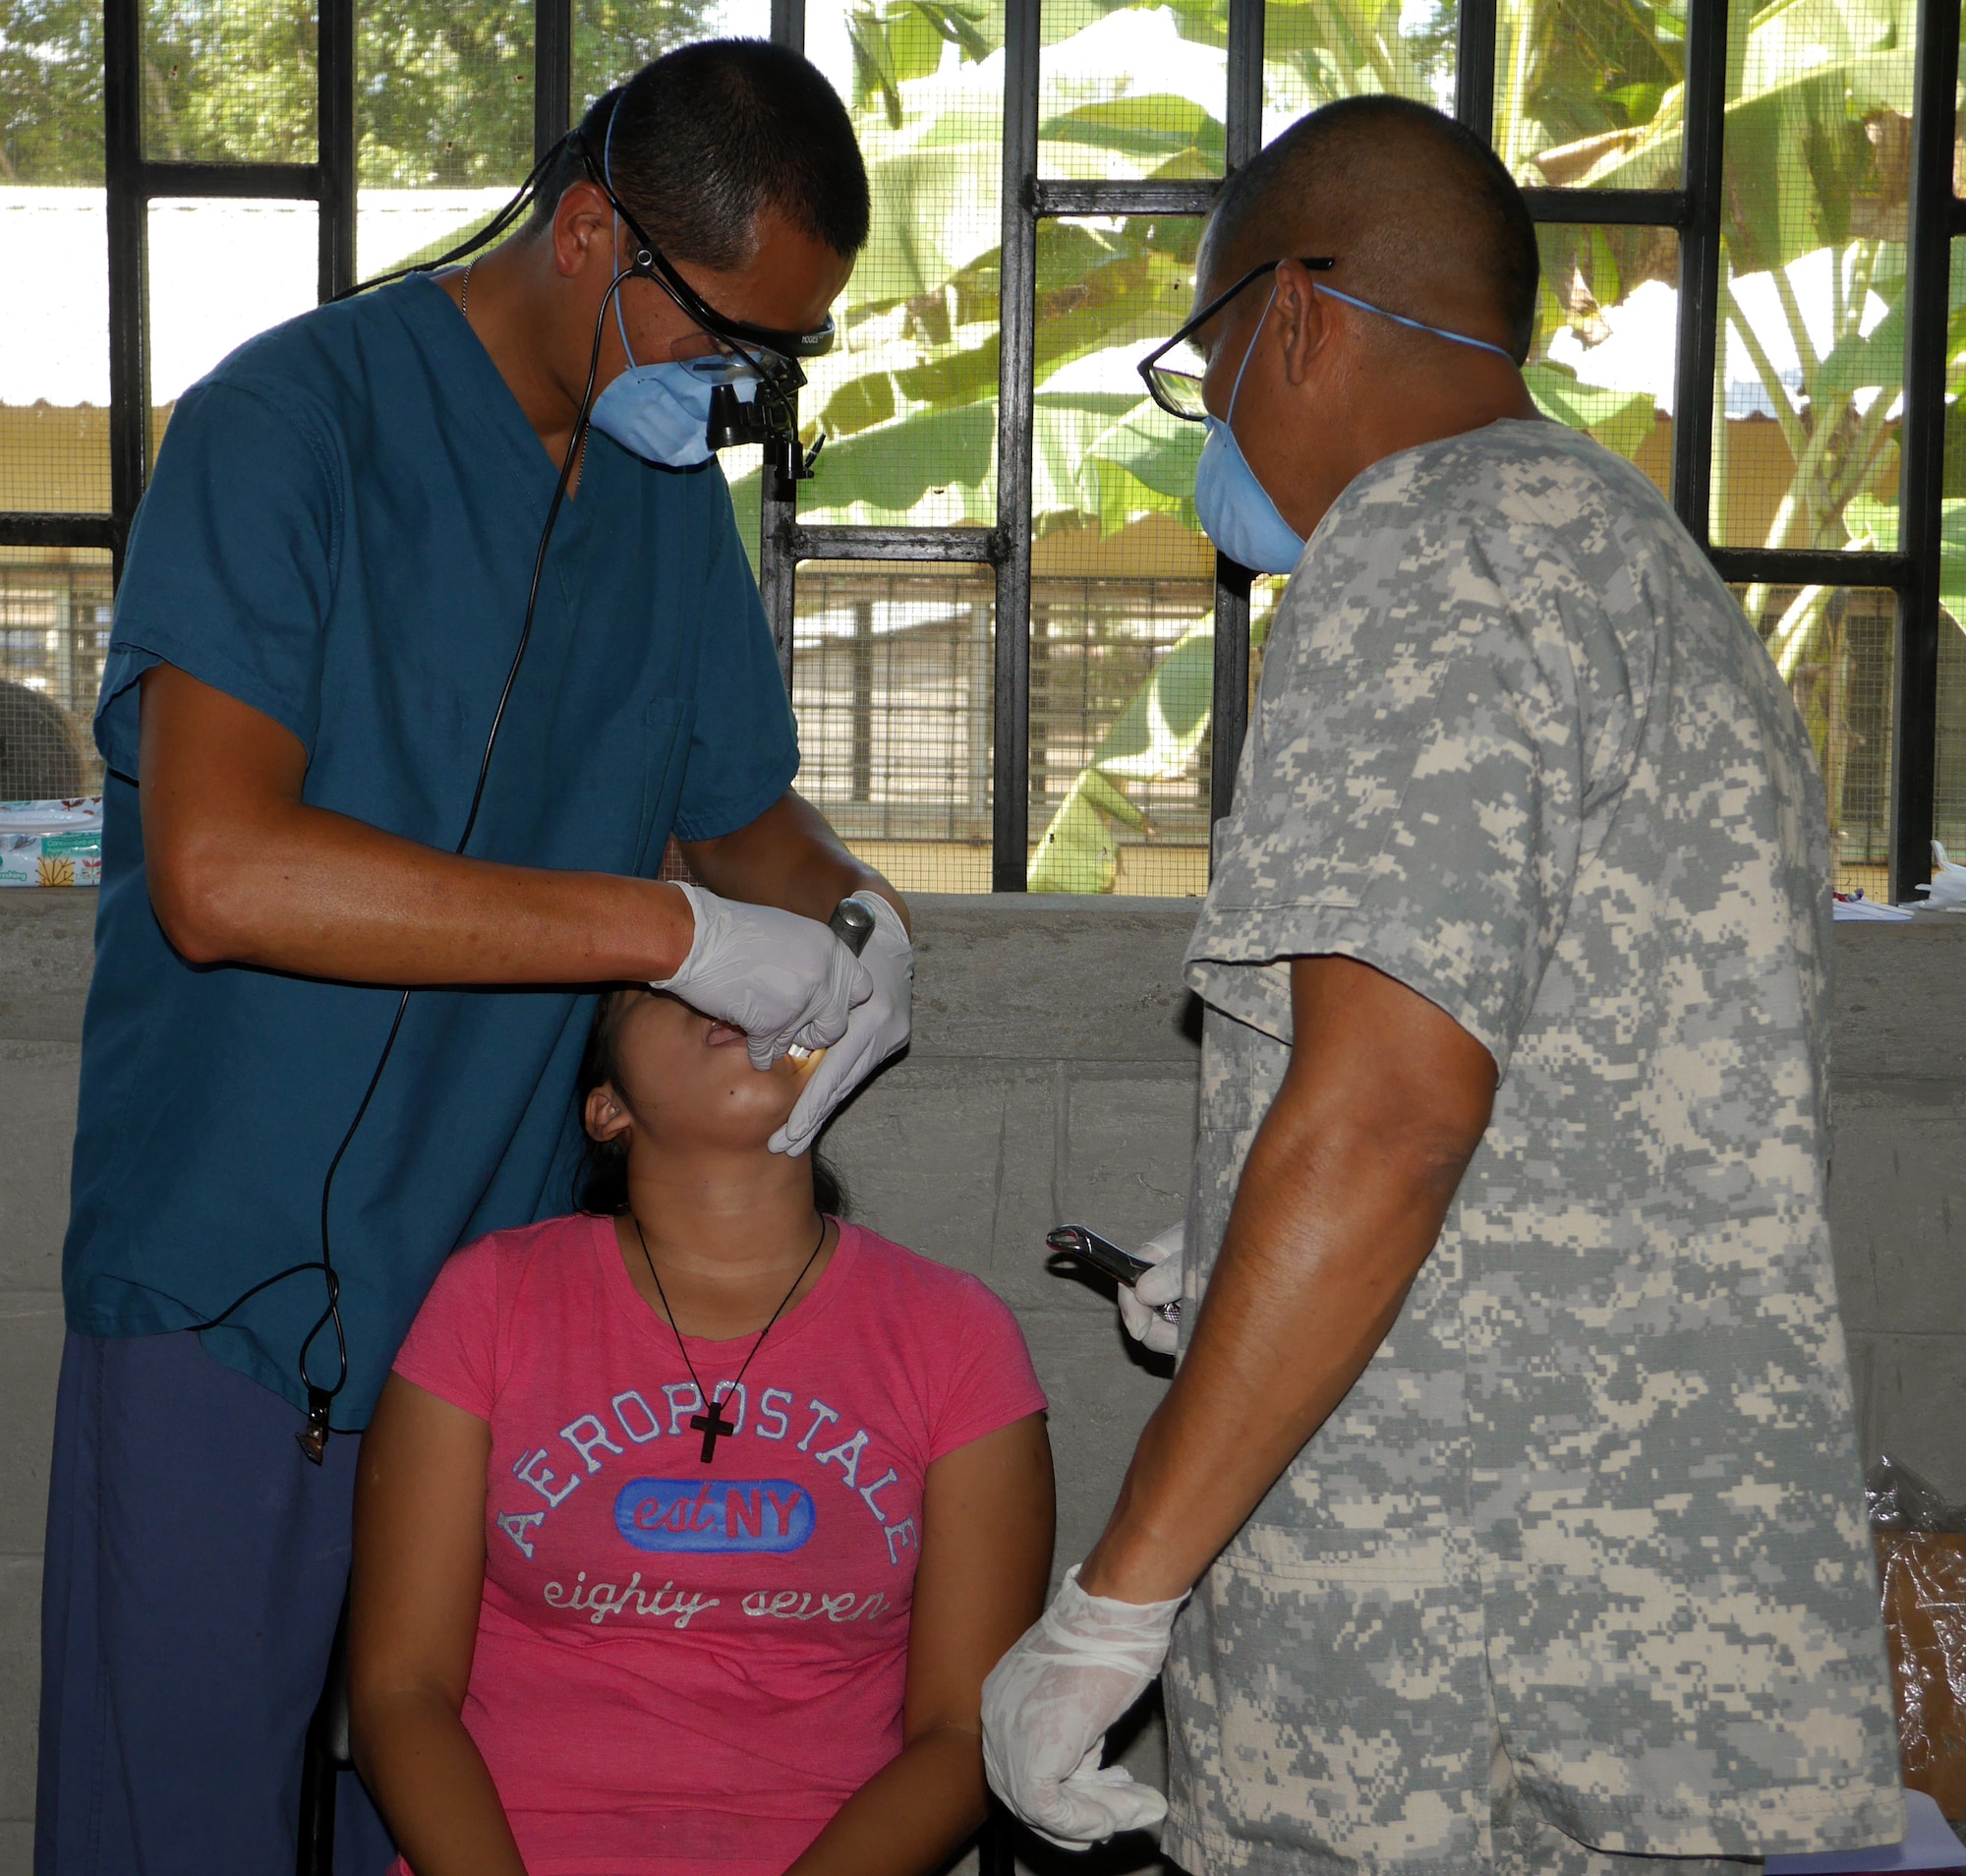 U.S. Army Lt. Col. Wing Djaya and U.S. Army Spc. Harold Aguirre perform a dental procedure during a Medical Readiness Training Exercise (MEDRETE) conducted by Joint Task Force-Bravo's Medical Element (MEDEL) in the village of Kele Kele, Department of Puerto Cortes, Honduras, Feb. 26, 2014.  MEDEL, with support from JTF-Bravo Joint Security Forces, Army Forces Battalion, and the 1-228th Aviation Regiment, partnered with the Honduran Ministry of Health, the Honduran Red Cross, and the Honduran military to provide medical care to more than 1,100 people over two days in Kele Kele and Caoba, two remote villages in the Puerto Cortes region of Honduras.  (Photo by U.S. Army Sgt. Courtney Kreft)